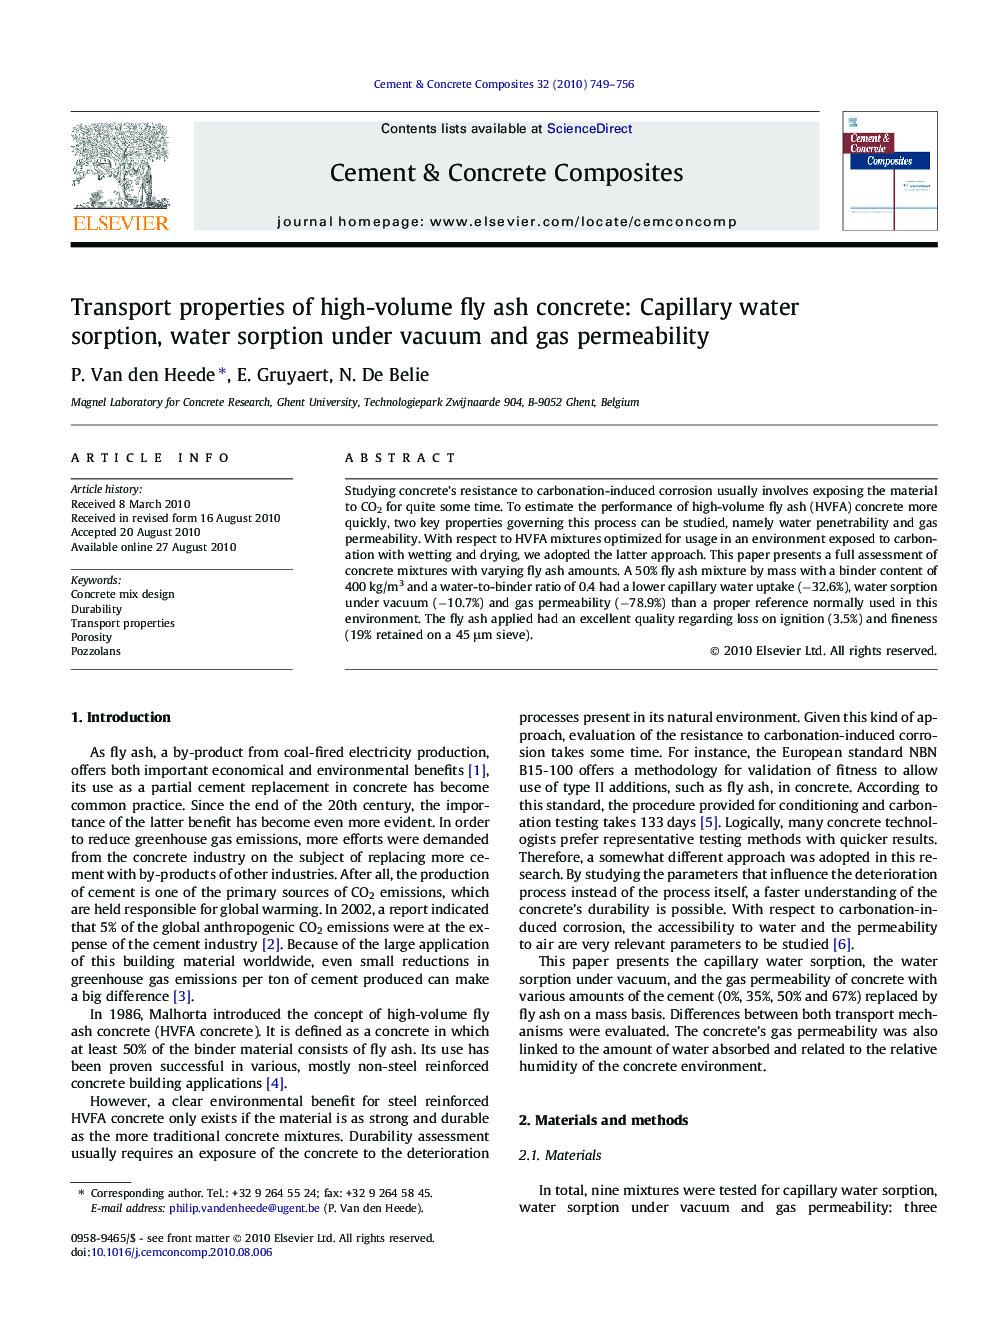 Transport properties of high-volume fly ash concrete: Capillary water sorption, water sorption under vacuum and gas permeability